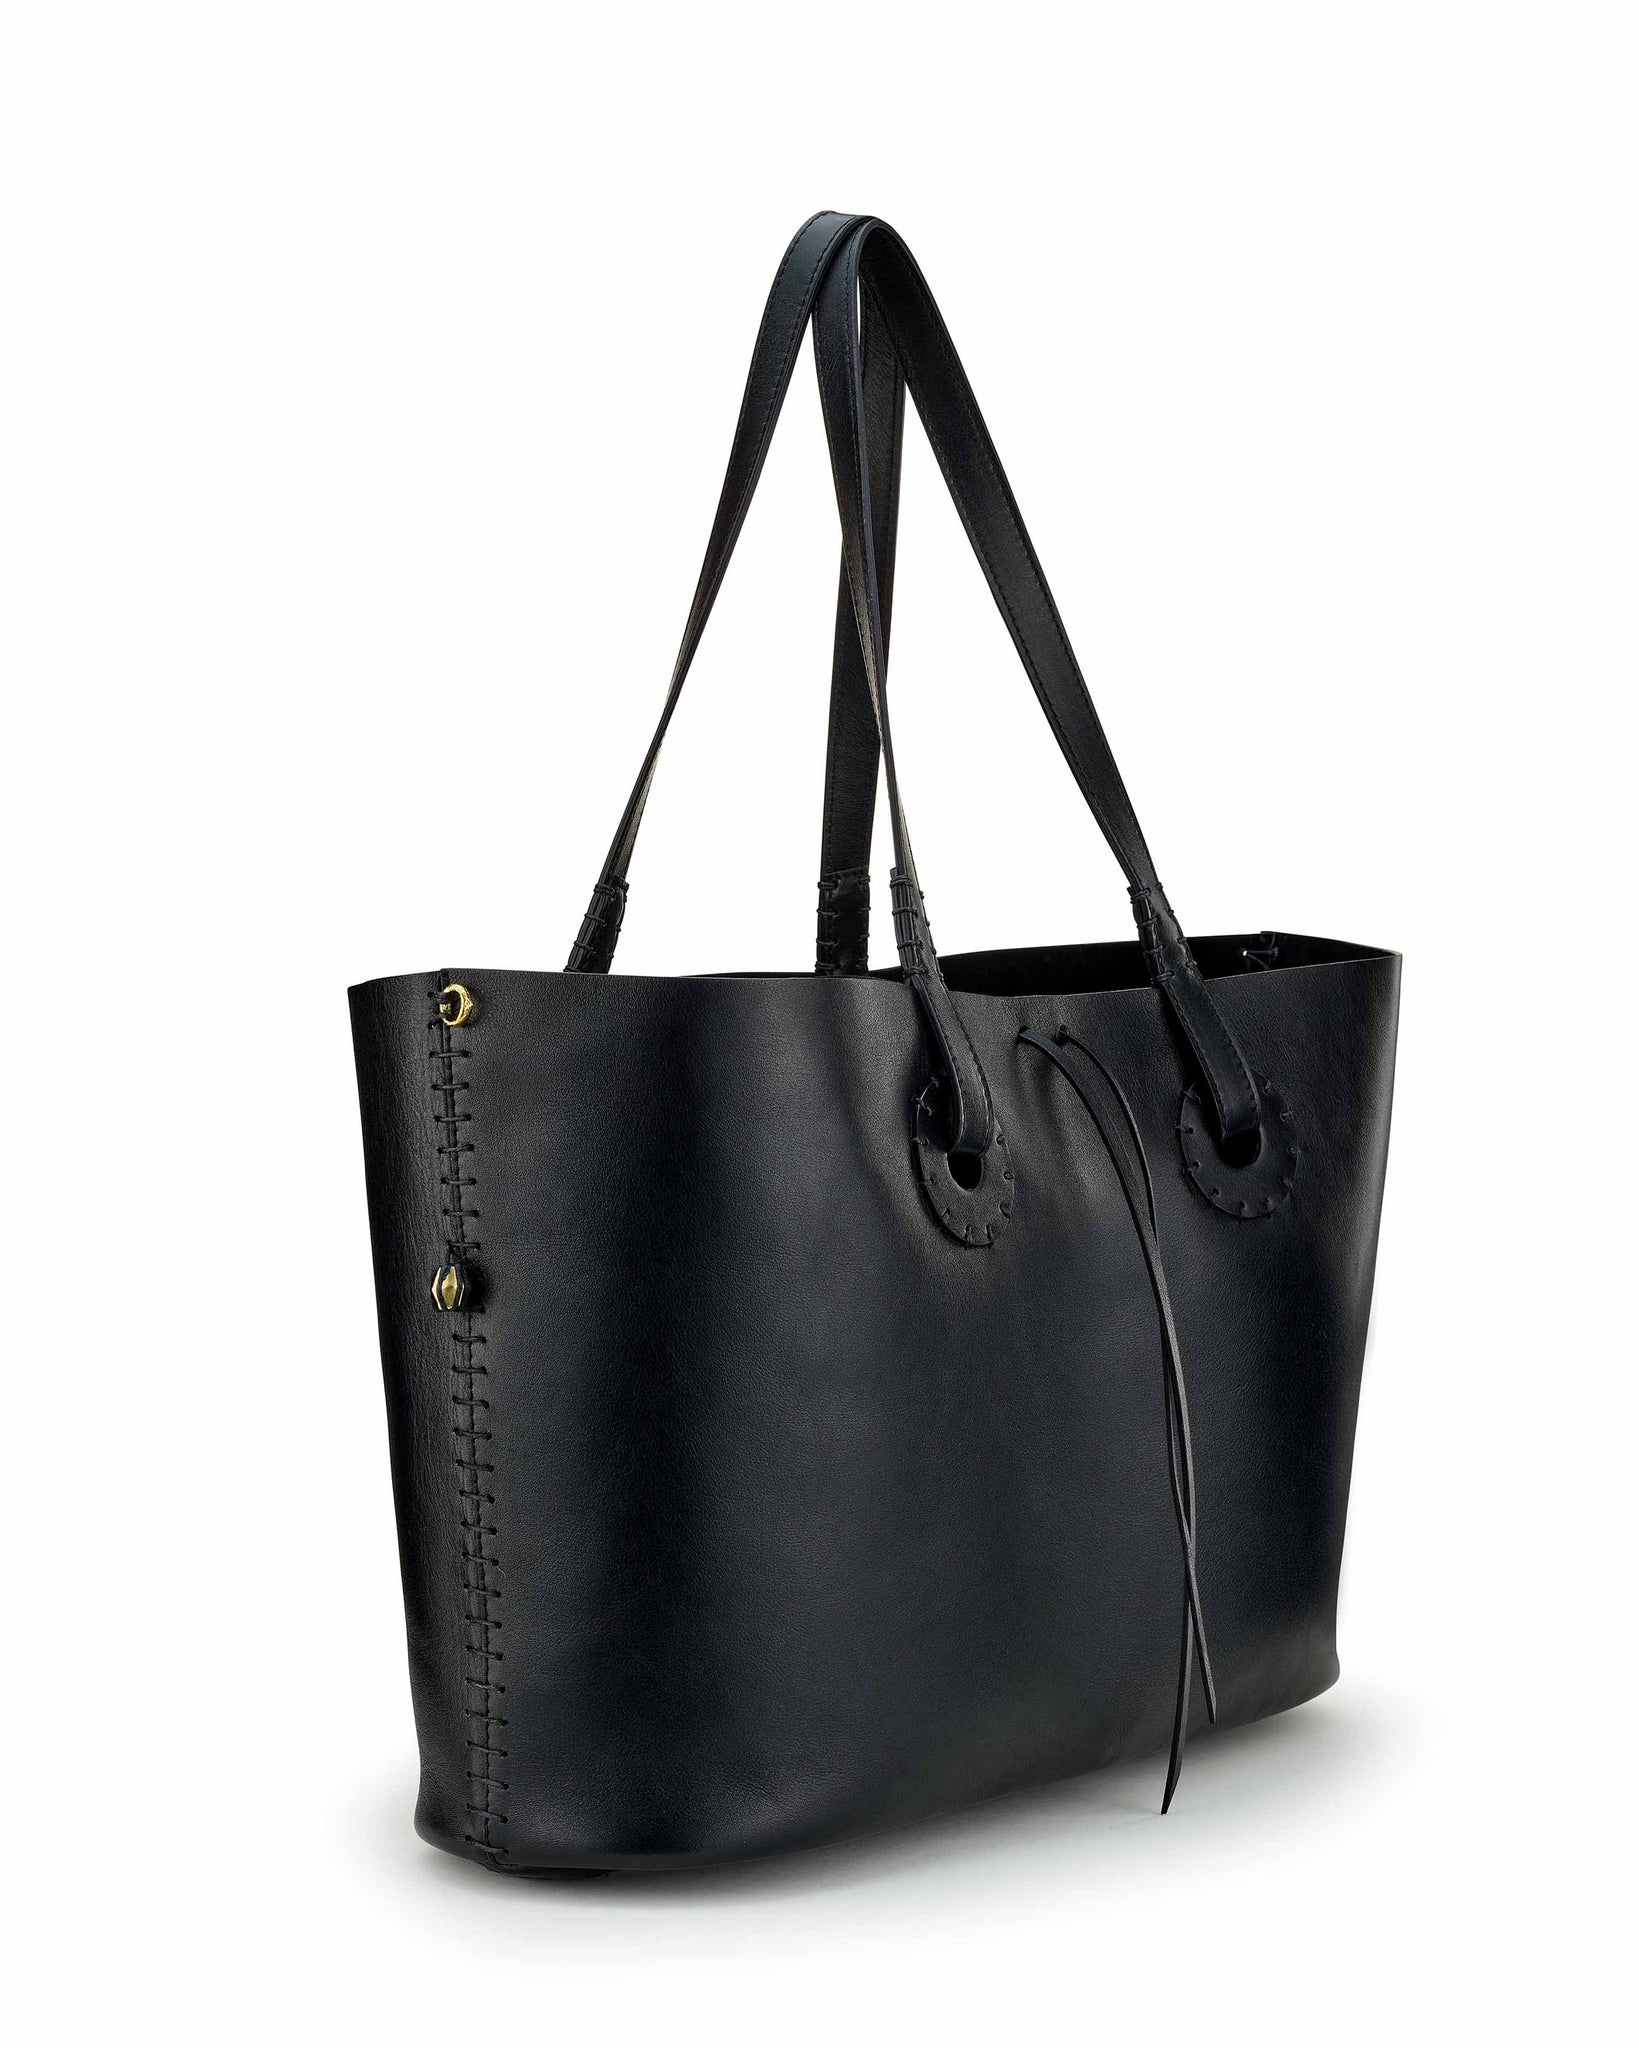 Extra Large Tote Bag Shopping Leather Bag Tote Leather Bag 